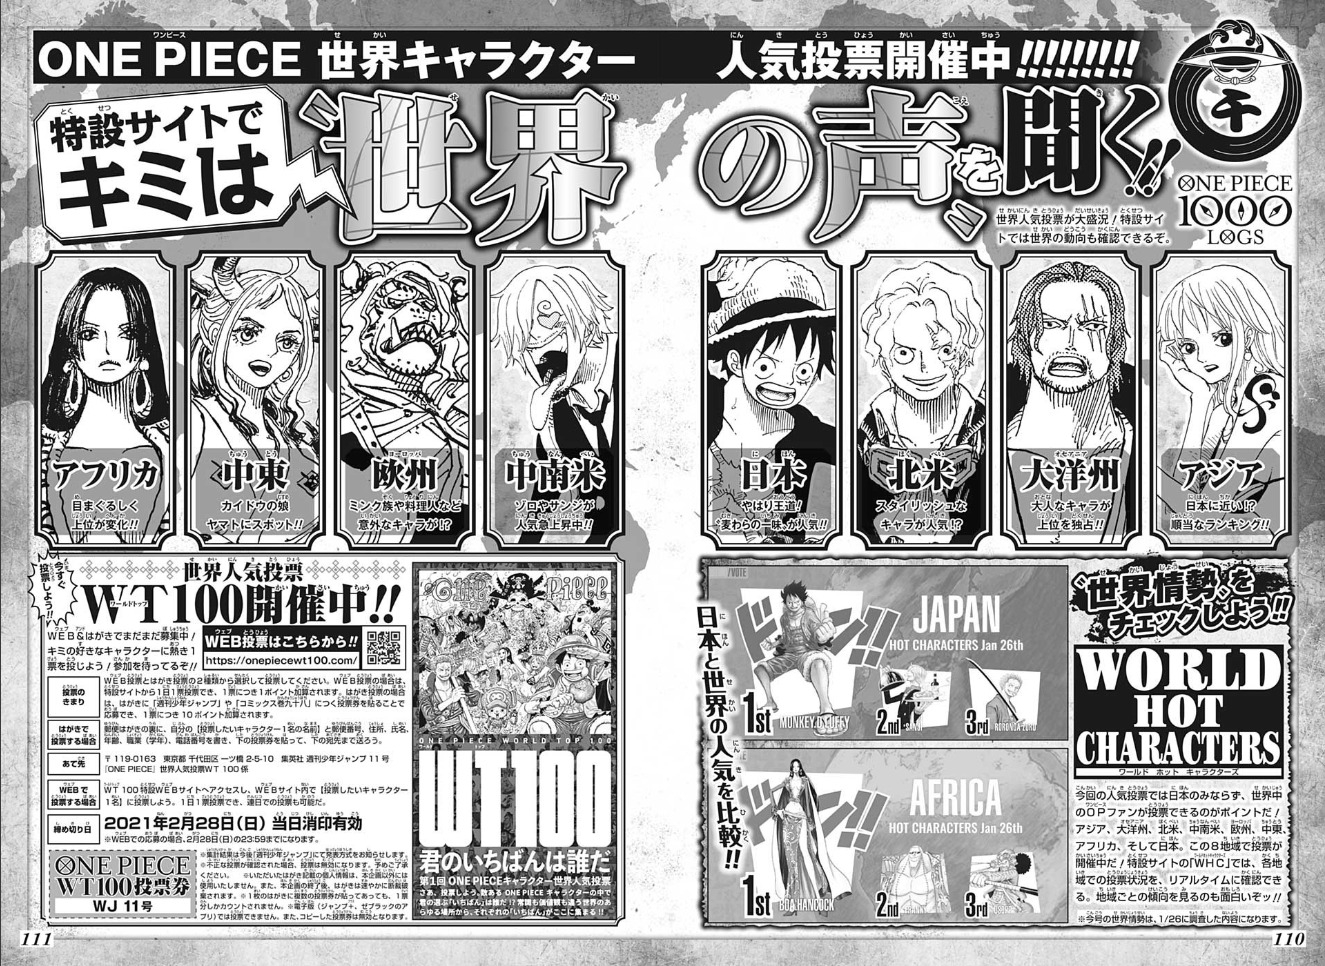 News One Piece 7th Characters Popularity Poll Announcement Page 35 Worstgen